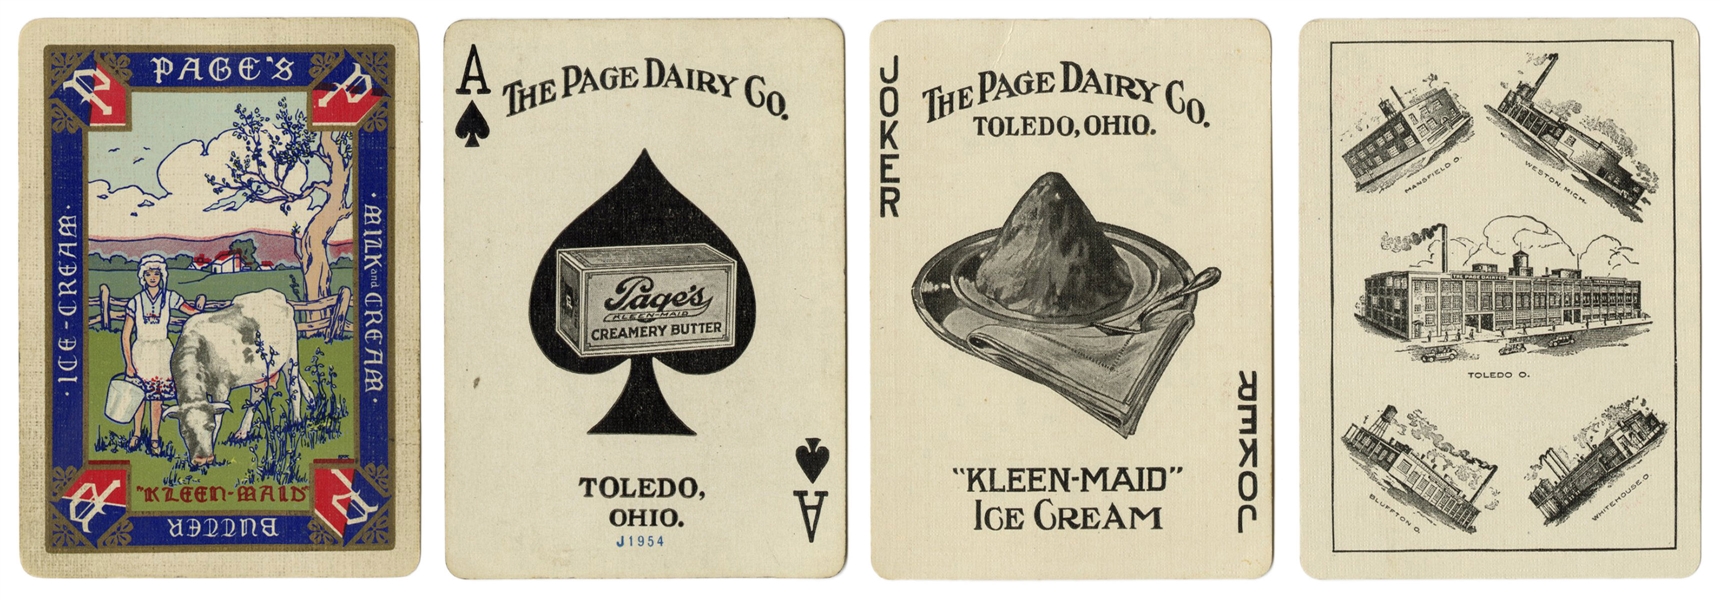  [Dairy] Page Dairy Co. Advertising Playing Cards. Circa 191...